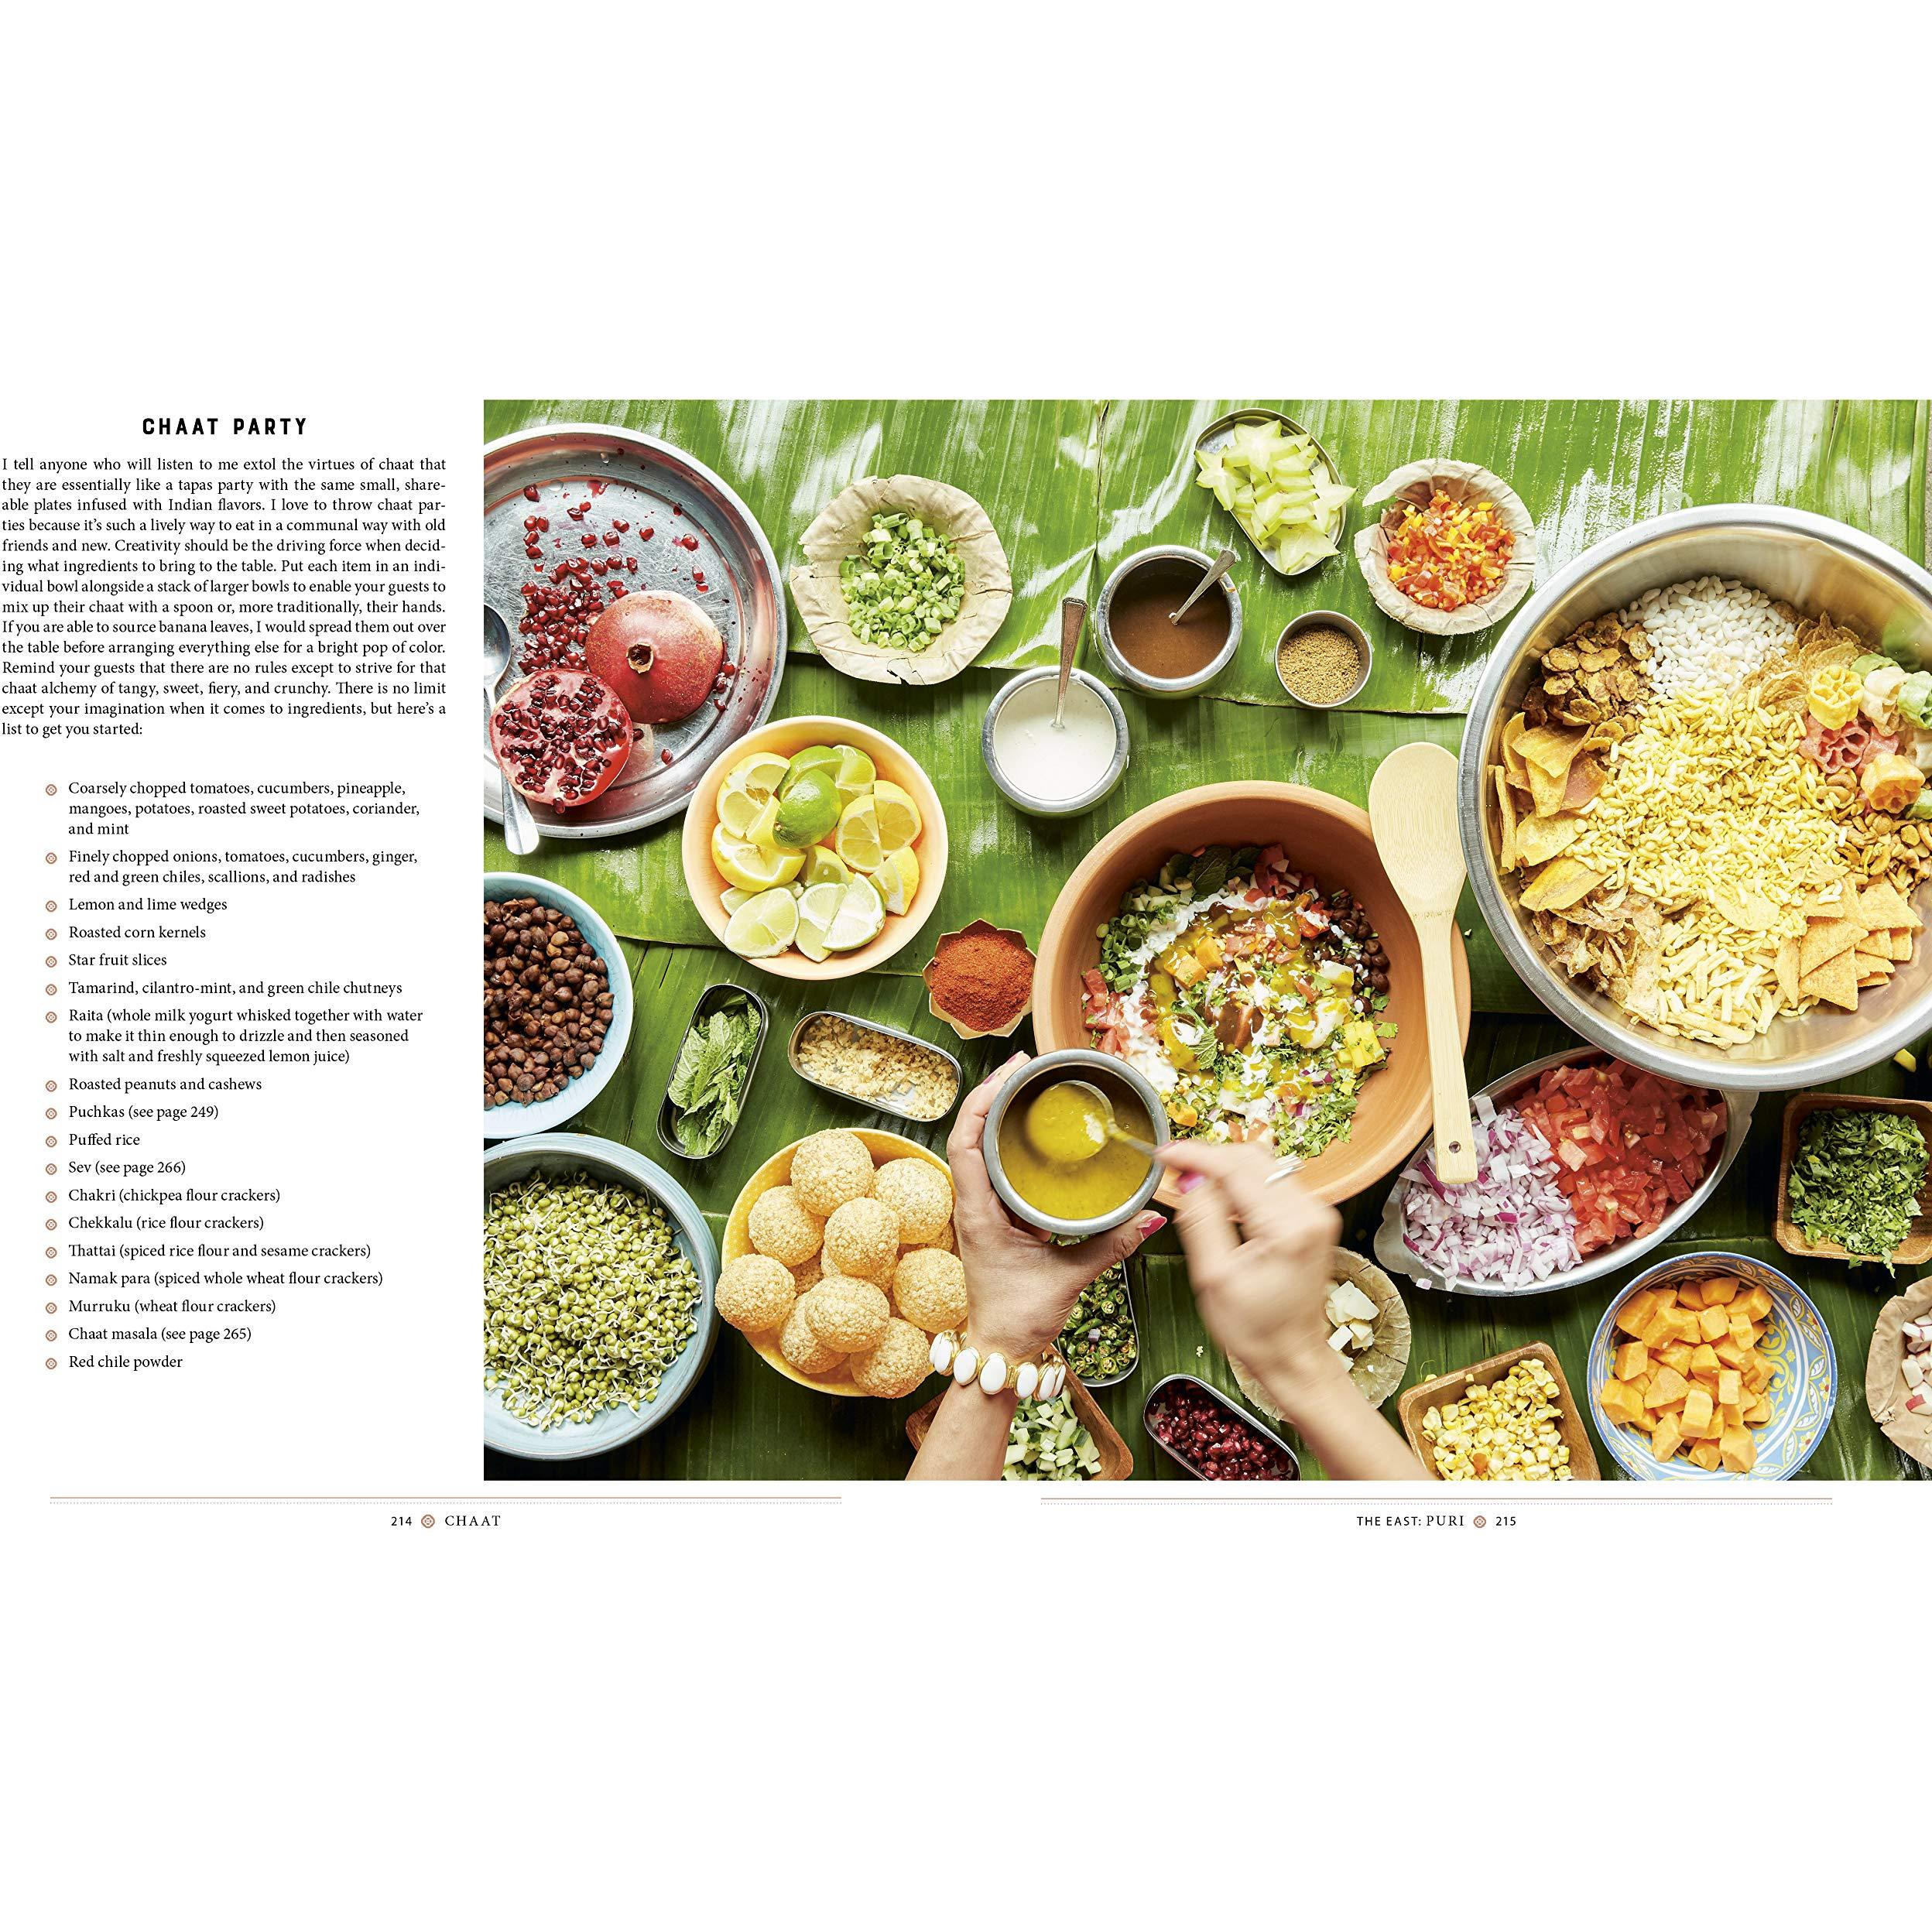 Chaat - Recipes from the Kitchens, Markets and Railways of India